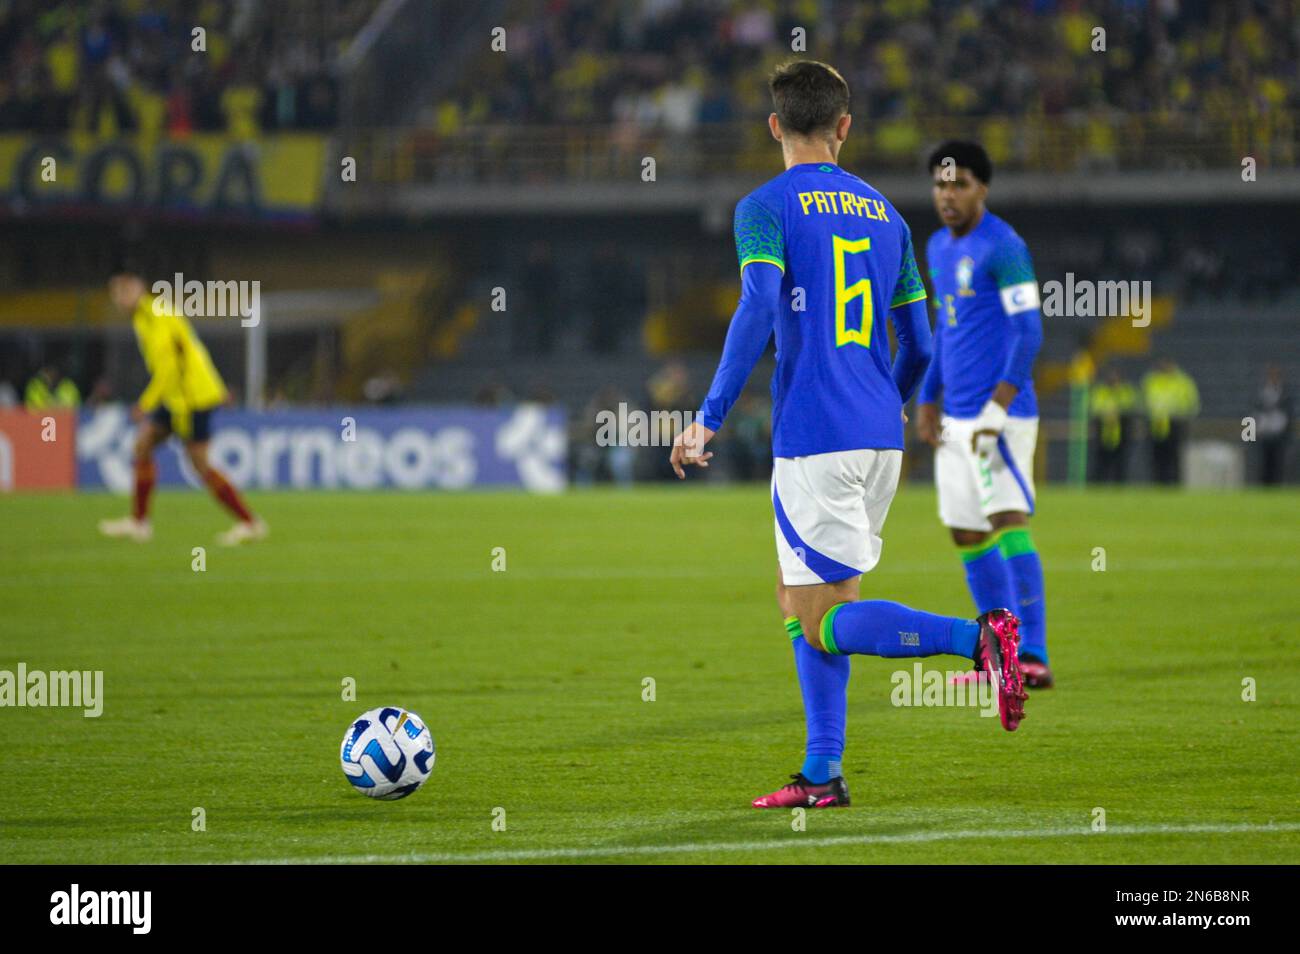 Bogota, Colombia on February 8, 2023. Brazil's Patryck during the CONMEBOL South American U-20 Colombia tournament match between Colombia and Brazil, in Bogota, Colombia on February 8, 2023. Photo by: Chepa Beltran/Long Visual Press Stock Photo